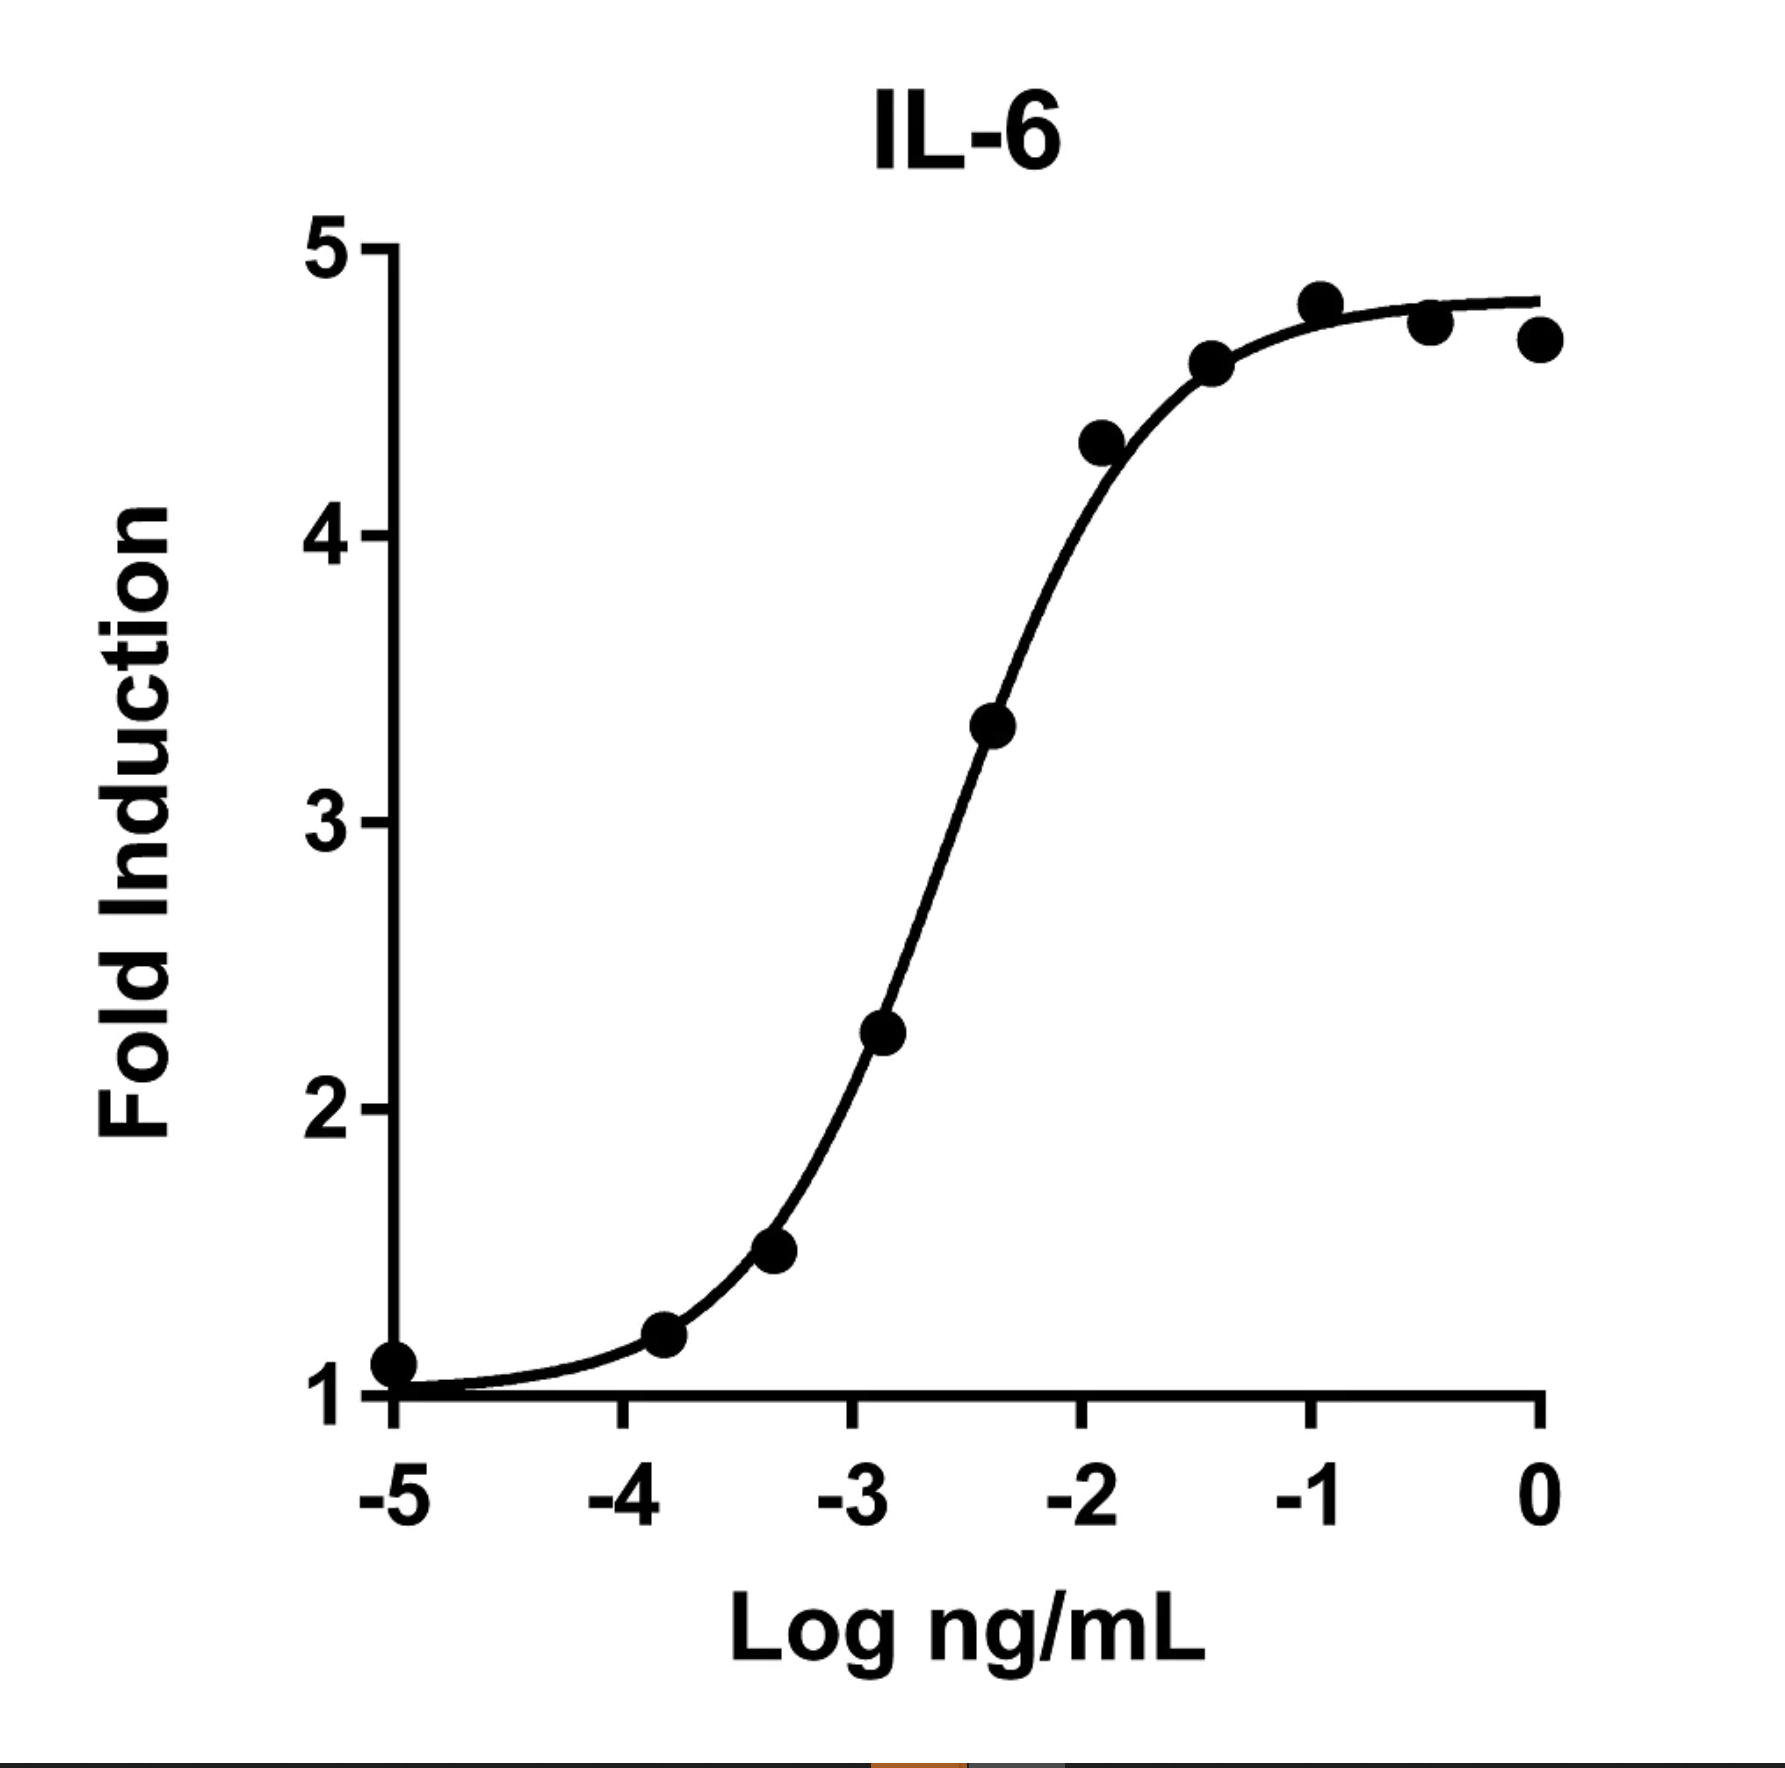 Recombinant human IL-6 (HZ-1019) stimulates dose-dependent proliferation of the 7TD1 hybridoma cell line. Cell number was quantitatively assessed by CellTiter® Cell Viability Reagent. 7TD1 cells were treated with increasing concentrations of recombinant IL-6 for 96 hours. The EC50 is <0.5 ng/mL​.